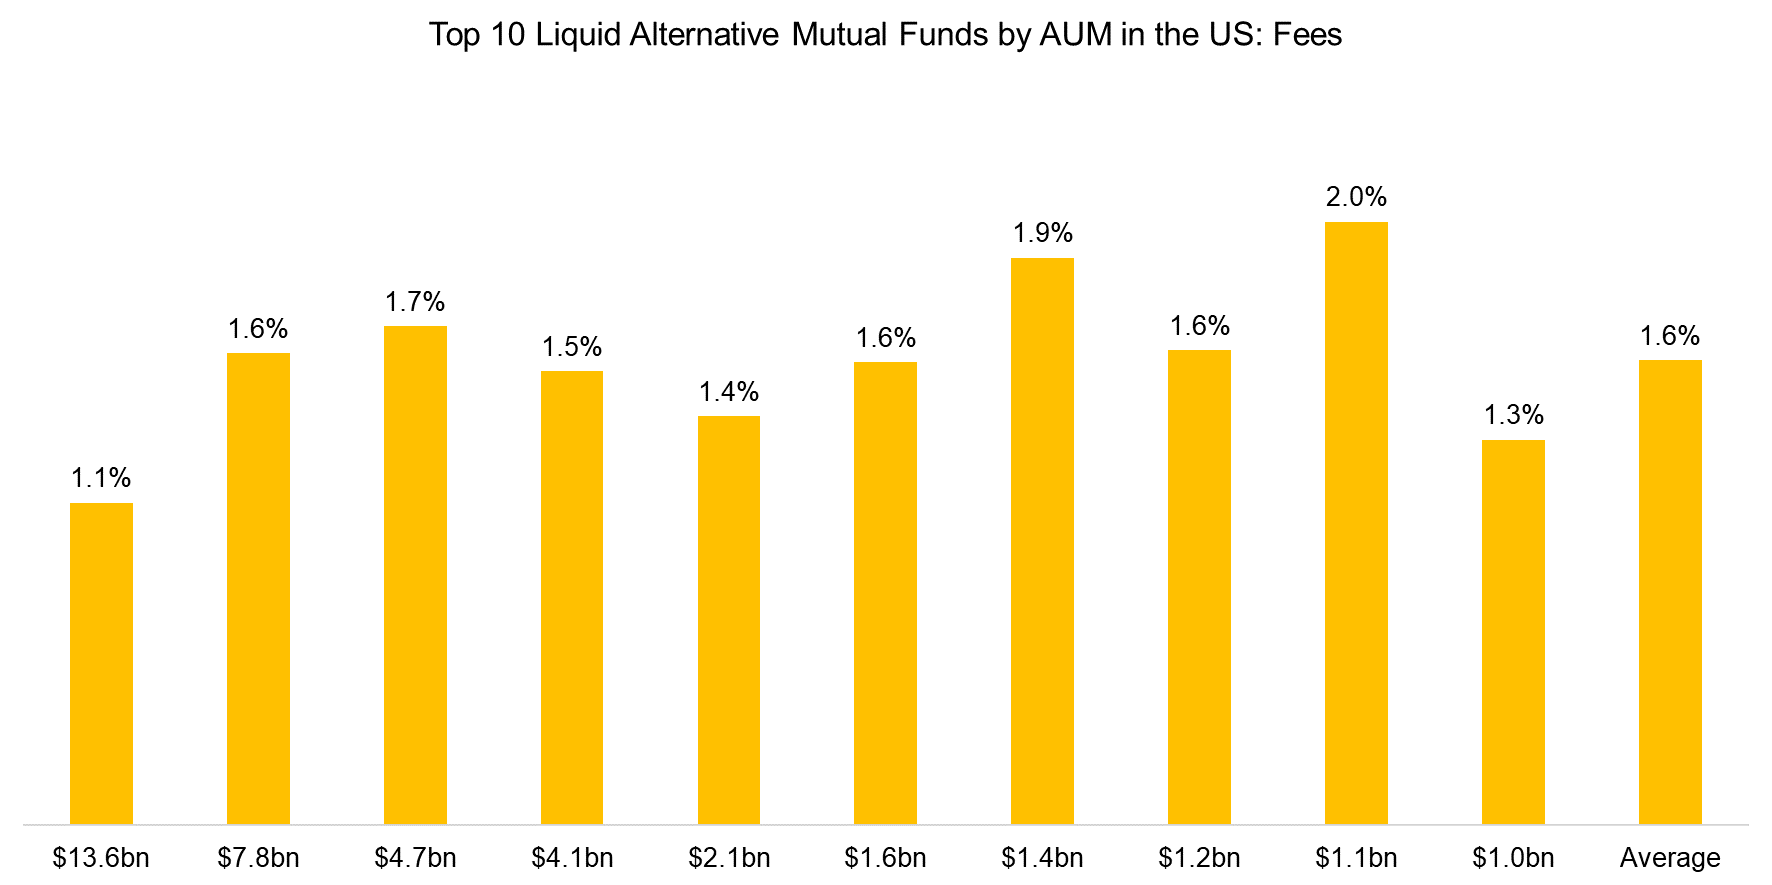 Top 10 Liquid Alternative Mutual Funds by AUM in the US Fees